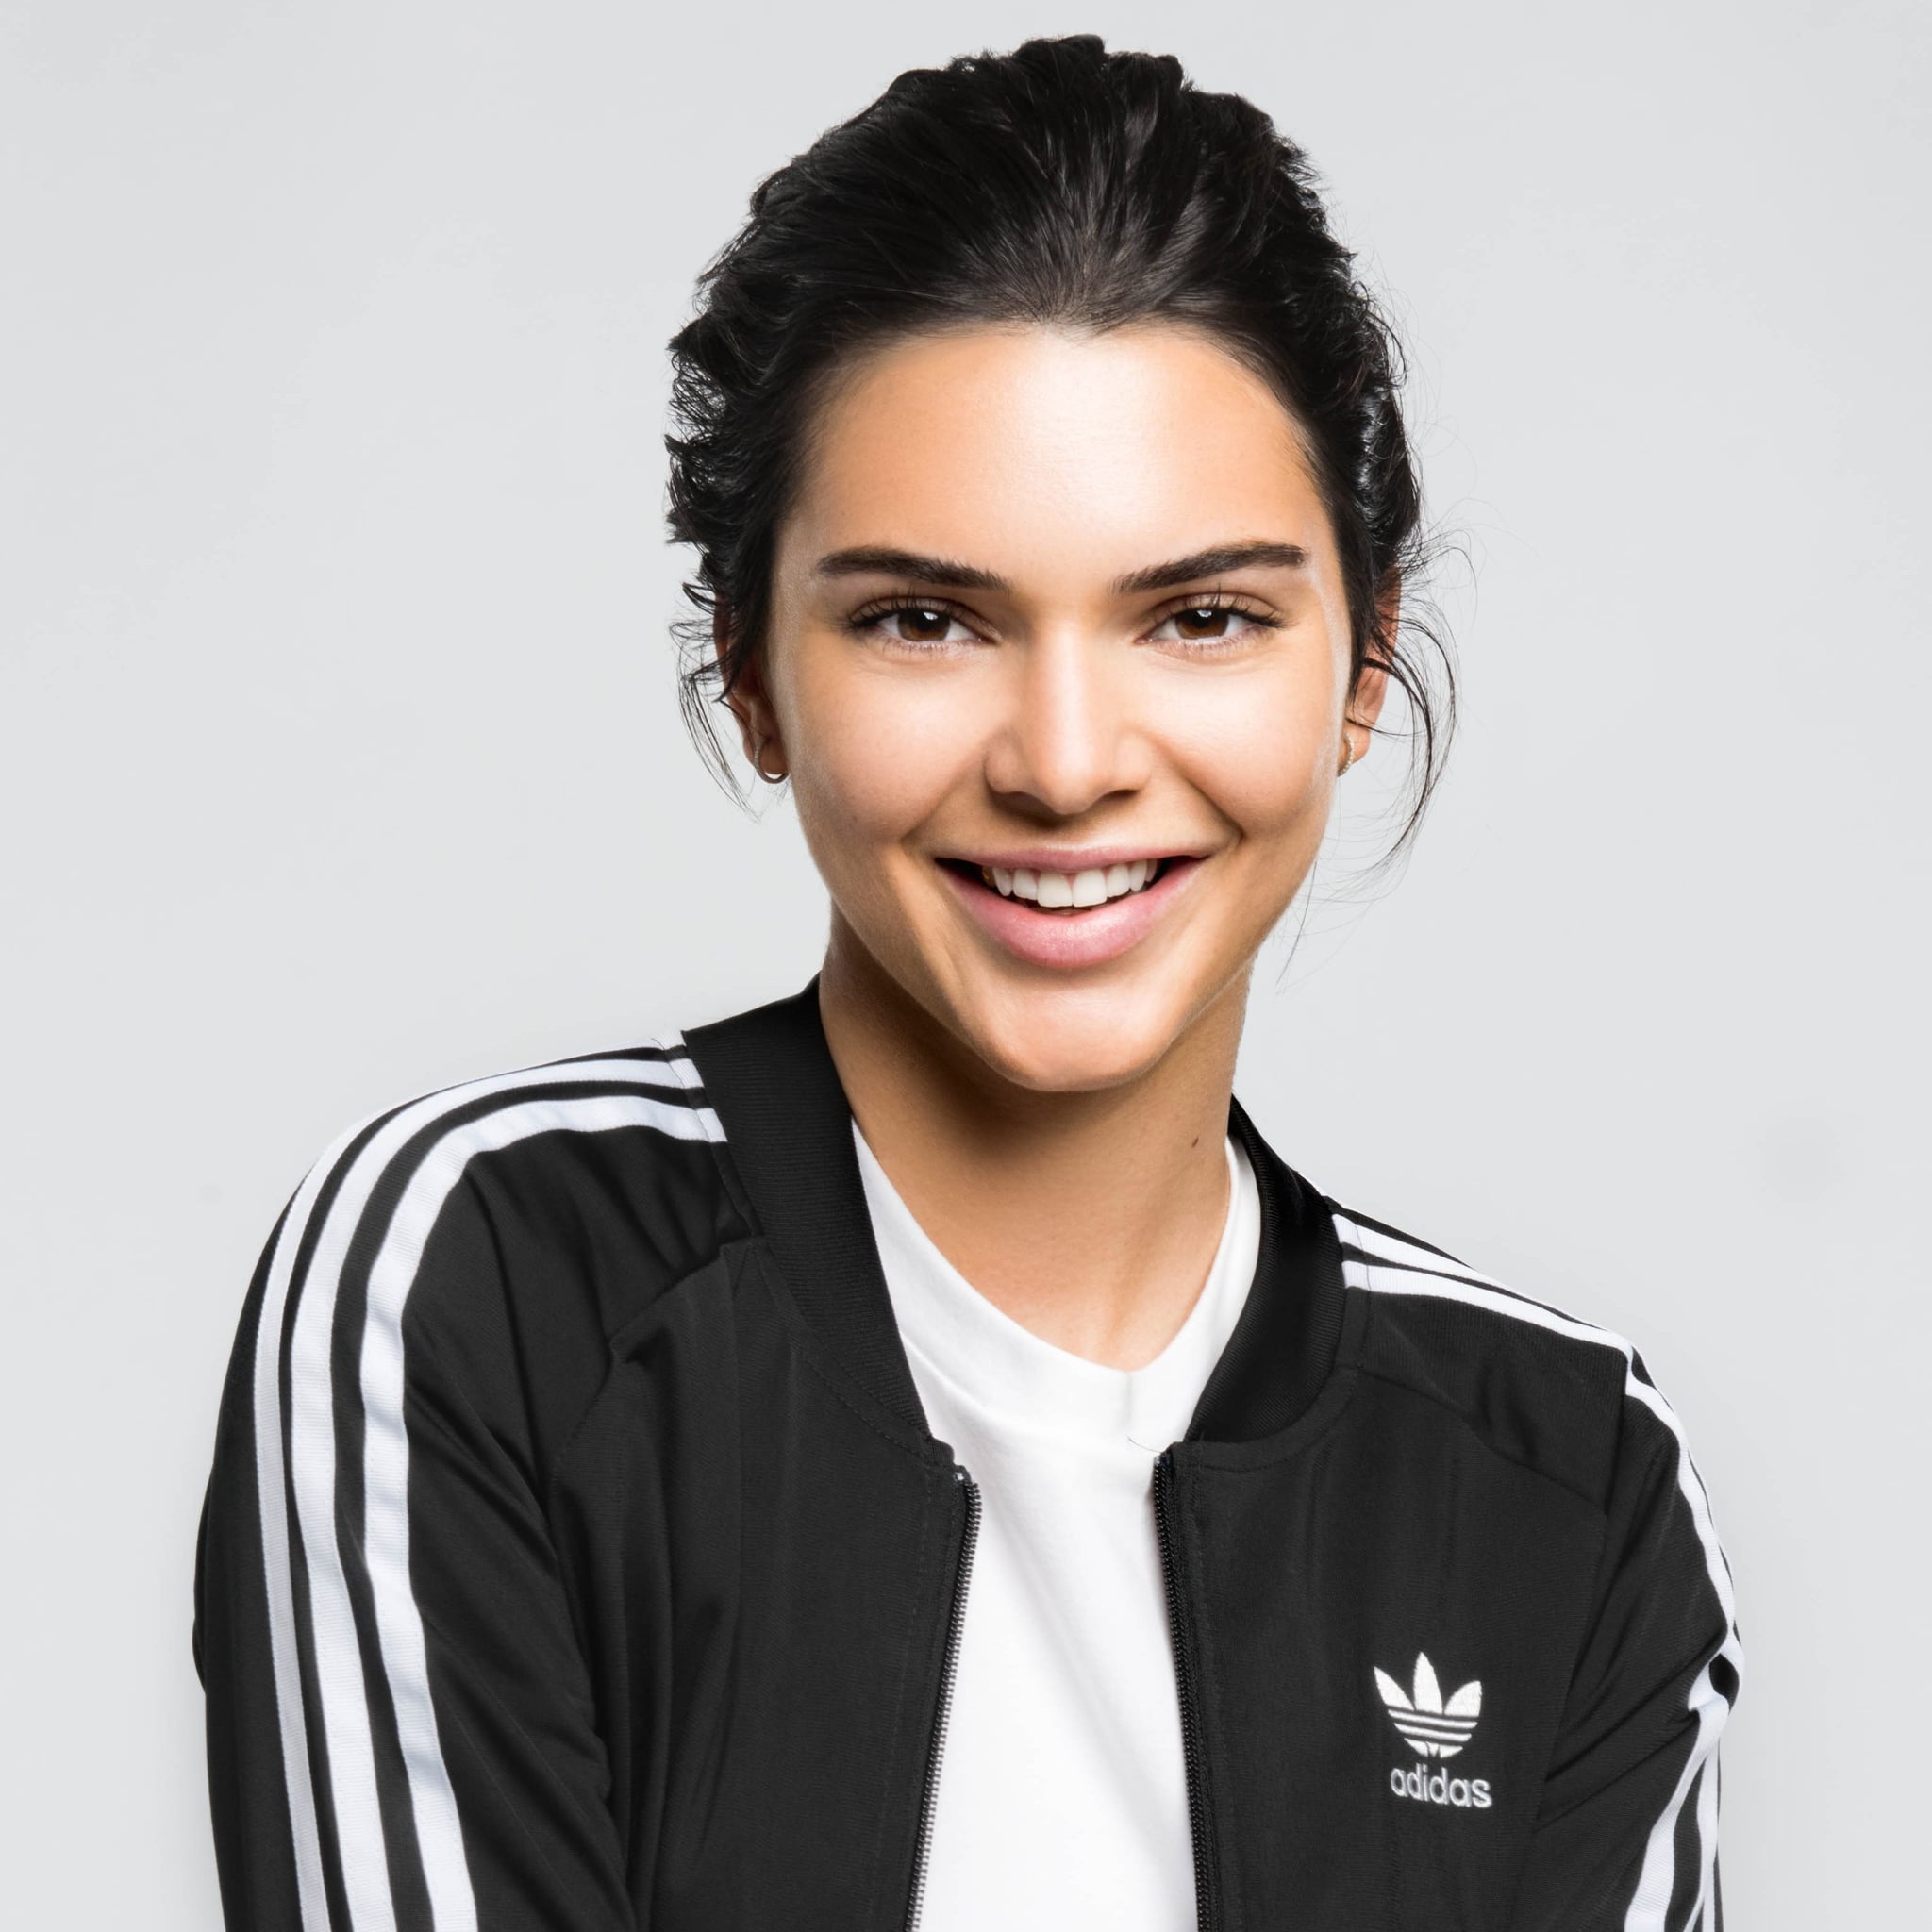 kloof vice versa Vereniging Does Kendall Jenner Have a Deal With Adidas? | POPSUGAR Fashion